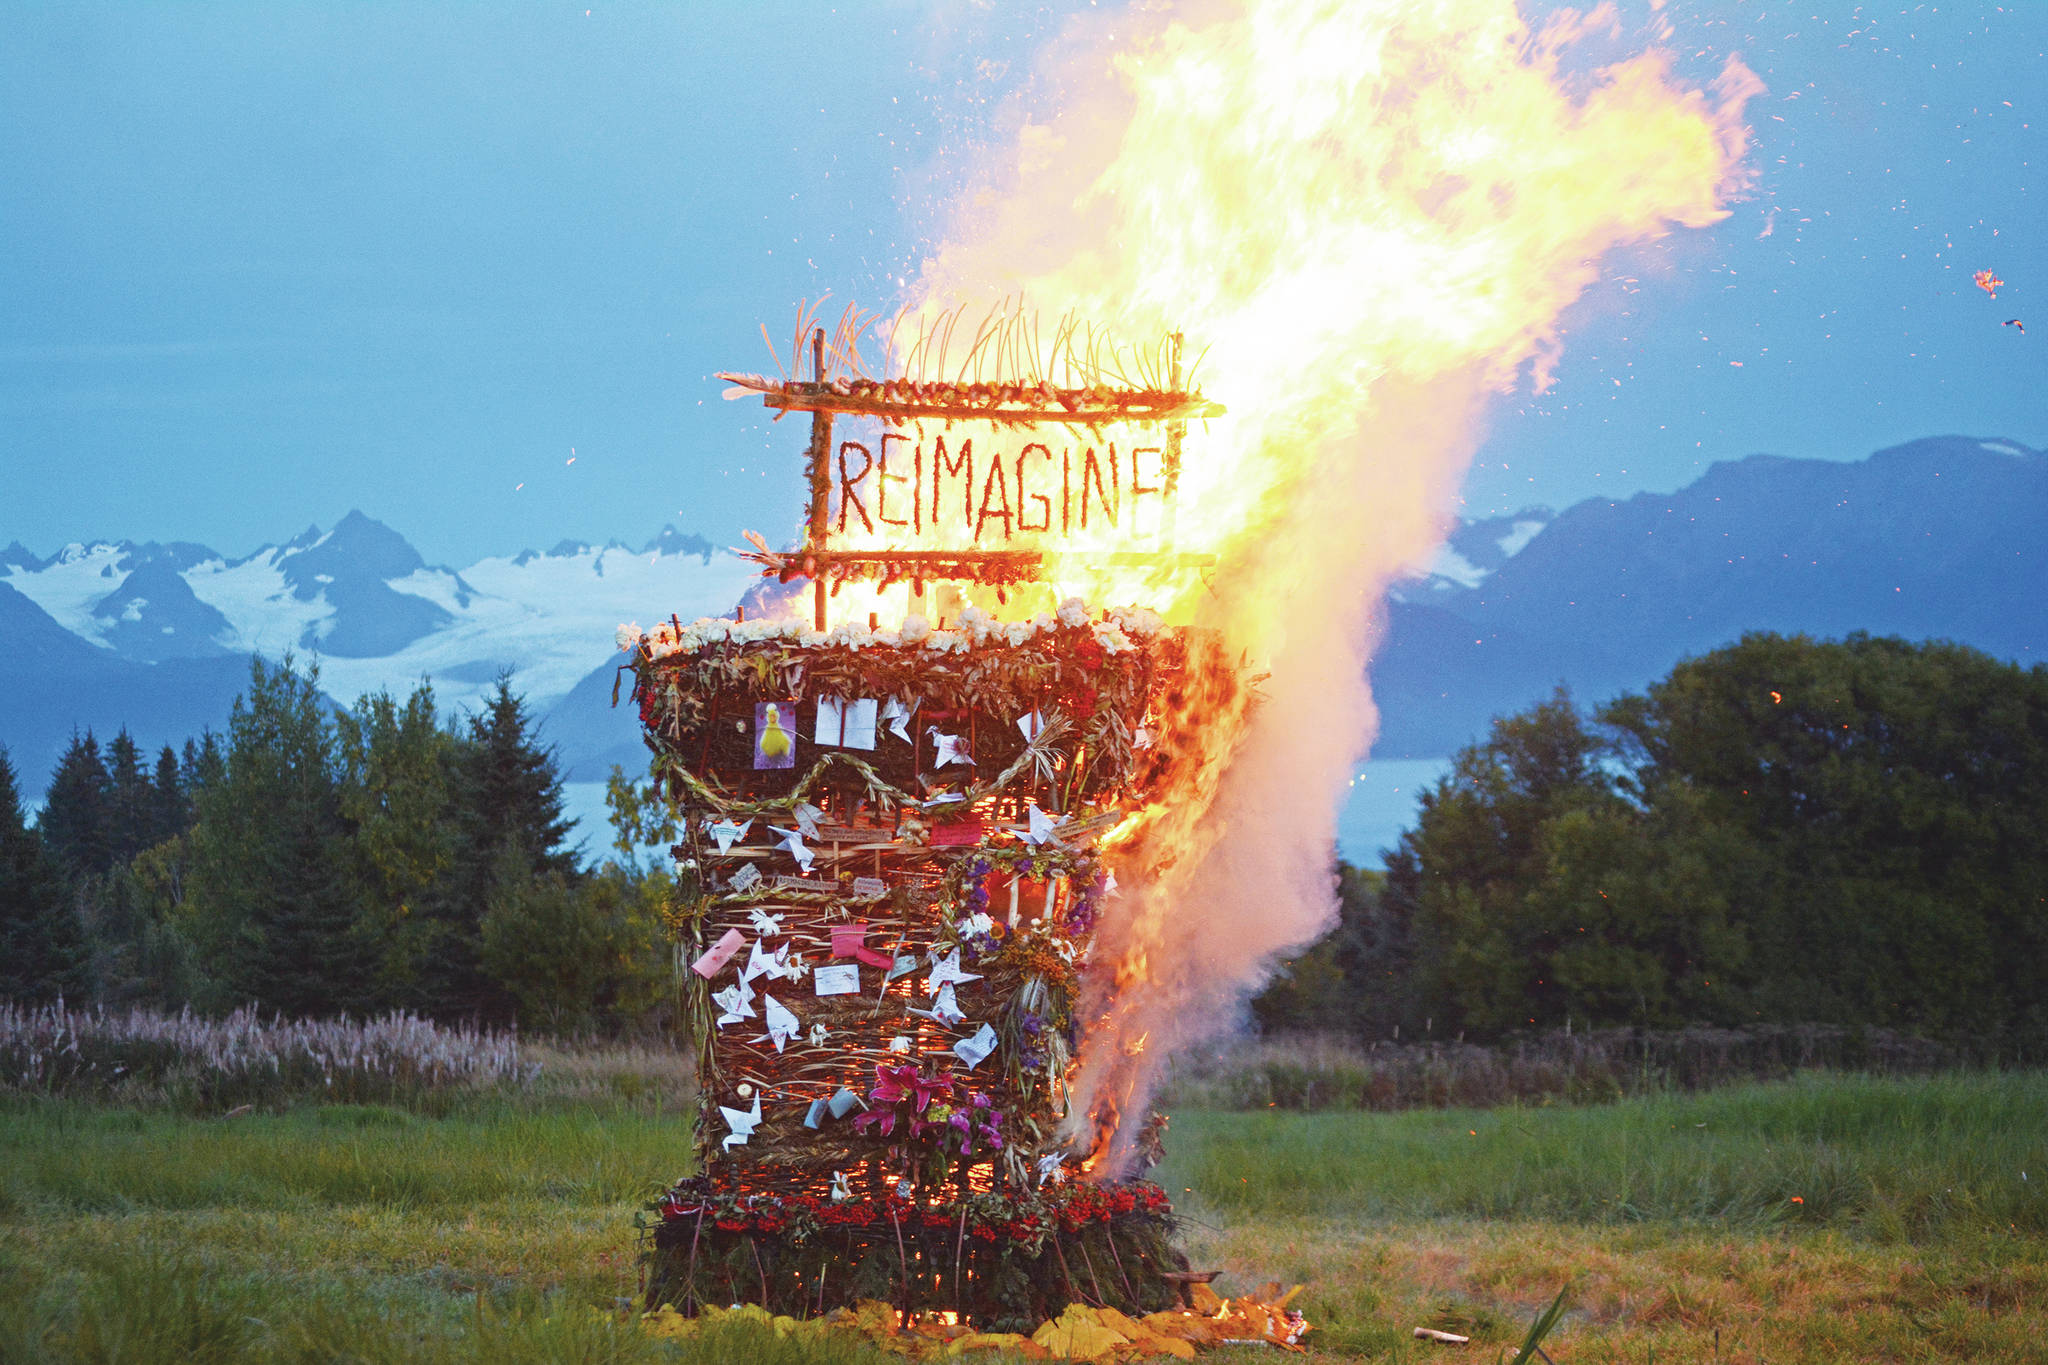 "Reimagine," the 17th annual Burning Basket, catches fire in a field on Sunday, Sept. 13, near Homer. Artist Mavis Muller intended to broadcast live on Facebook and YouTube the burning of the basket, but because of technical difficulties that didn't happen. (Photo by Michael Armstrong/Homer News)